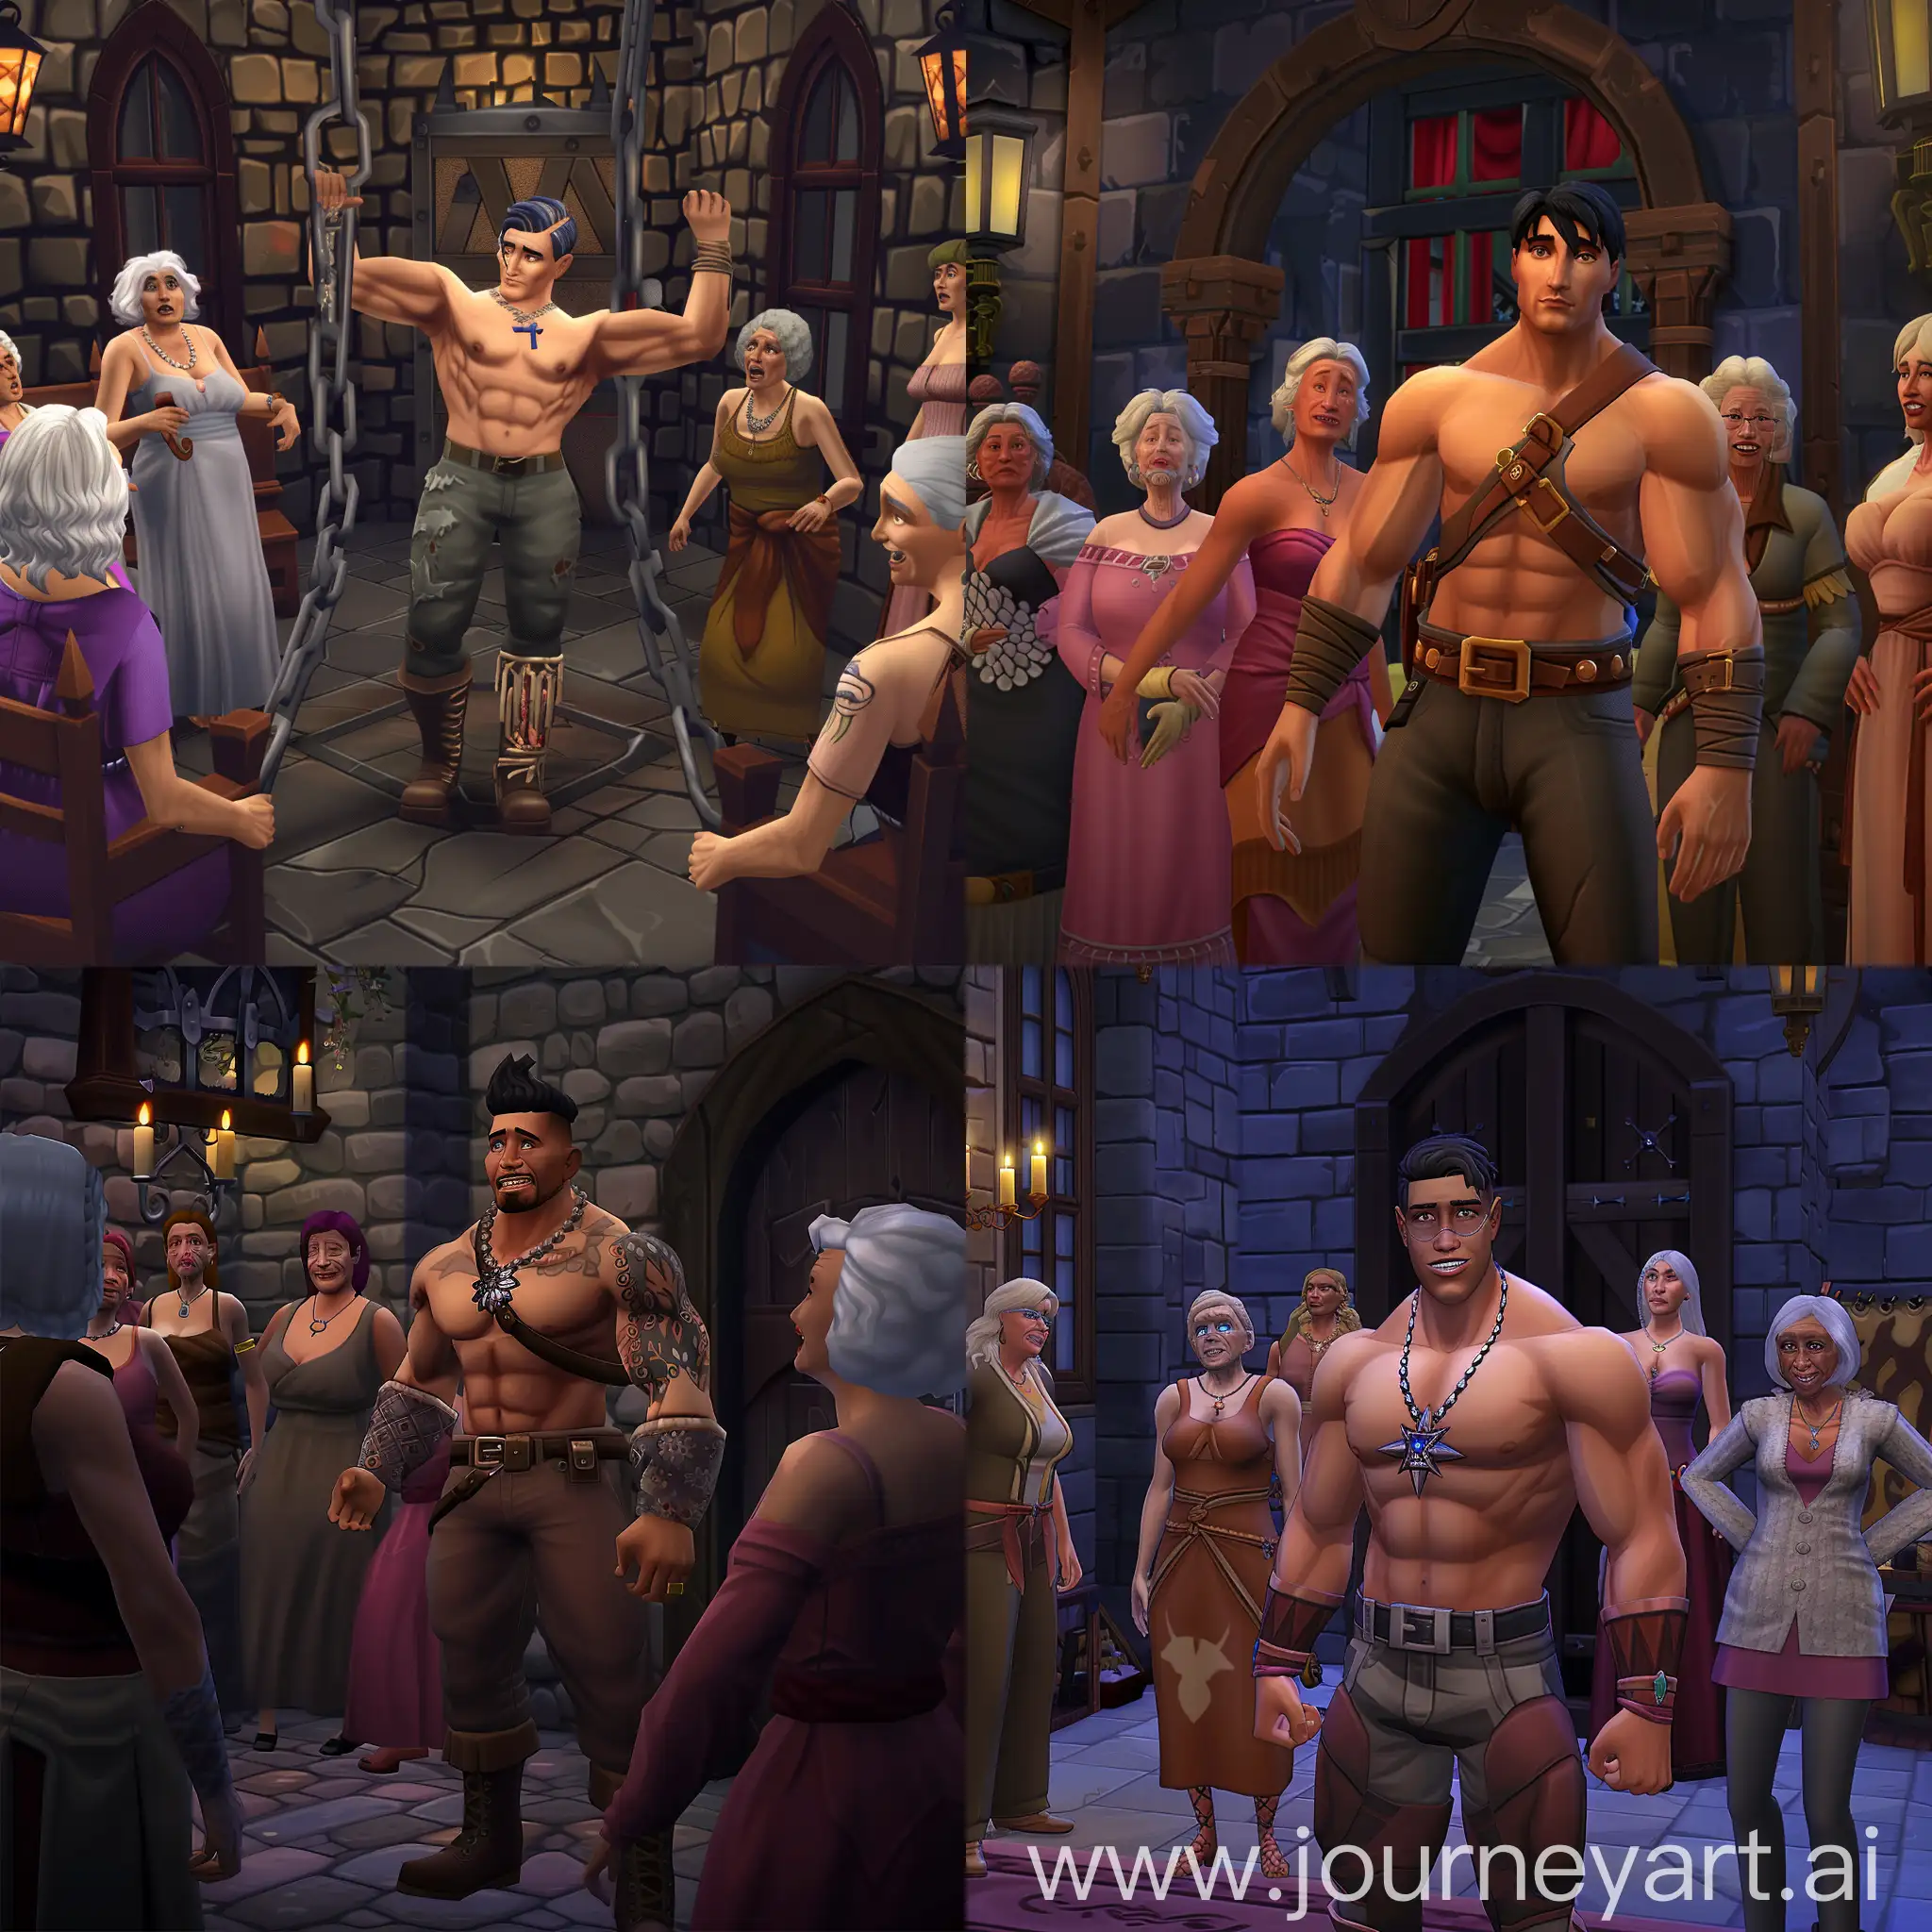 A muscular Sims character gets trapped in a Dungeon surrounded by older women